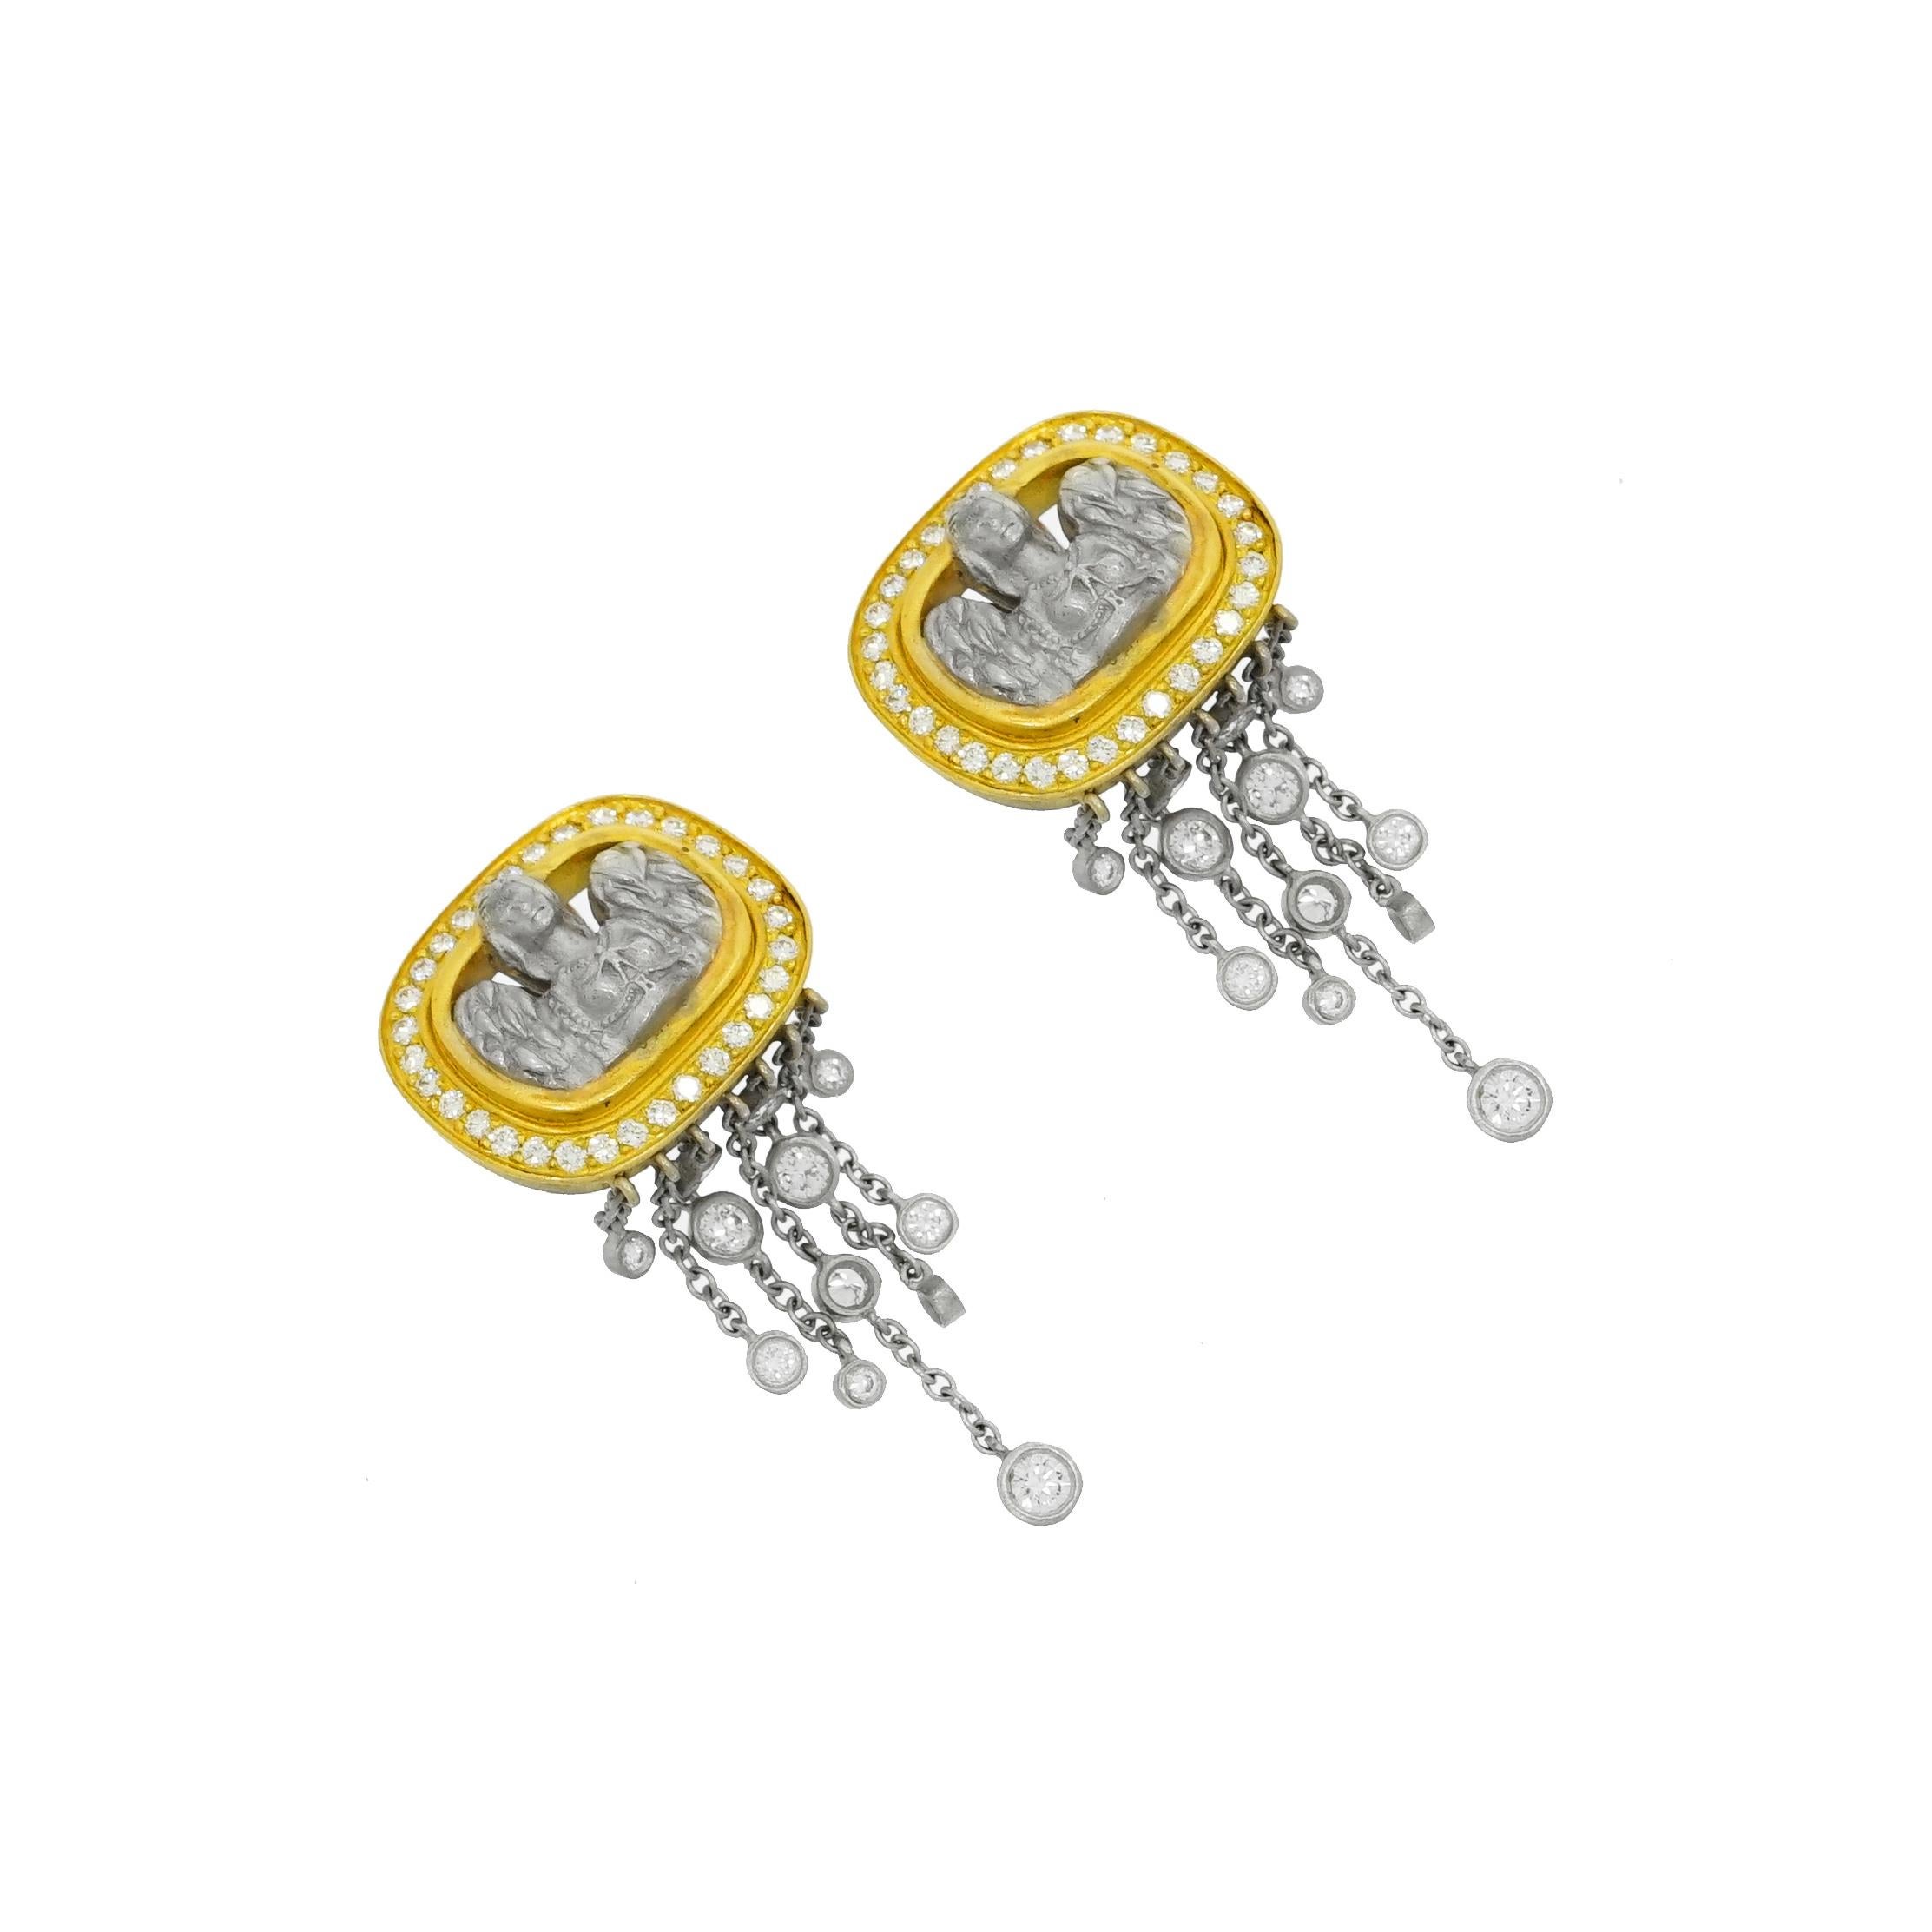 Barry Kieselstein-Cord (BKC) is a critically acclaimed, international, award-winning legendary American designer, artist, and photographer.
This gorgeous pair of earrings crafted in 18k yellow and white gold with a rain of white round Diamonds. 
A